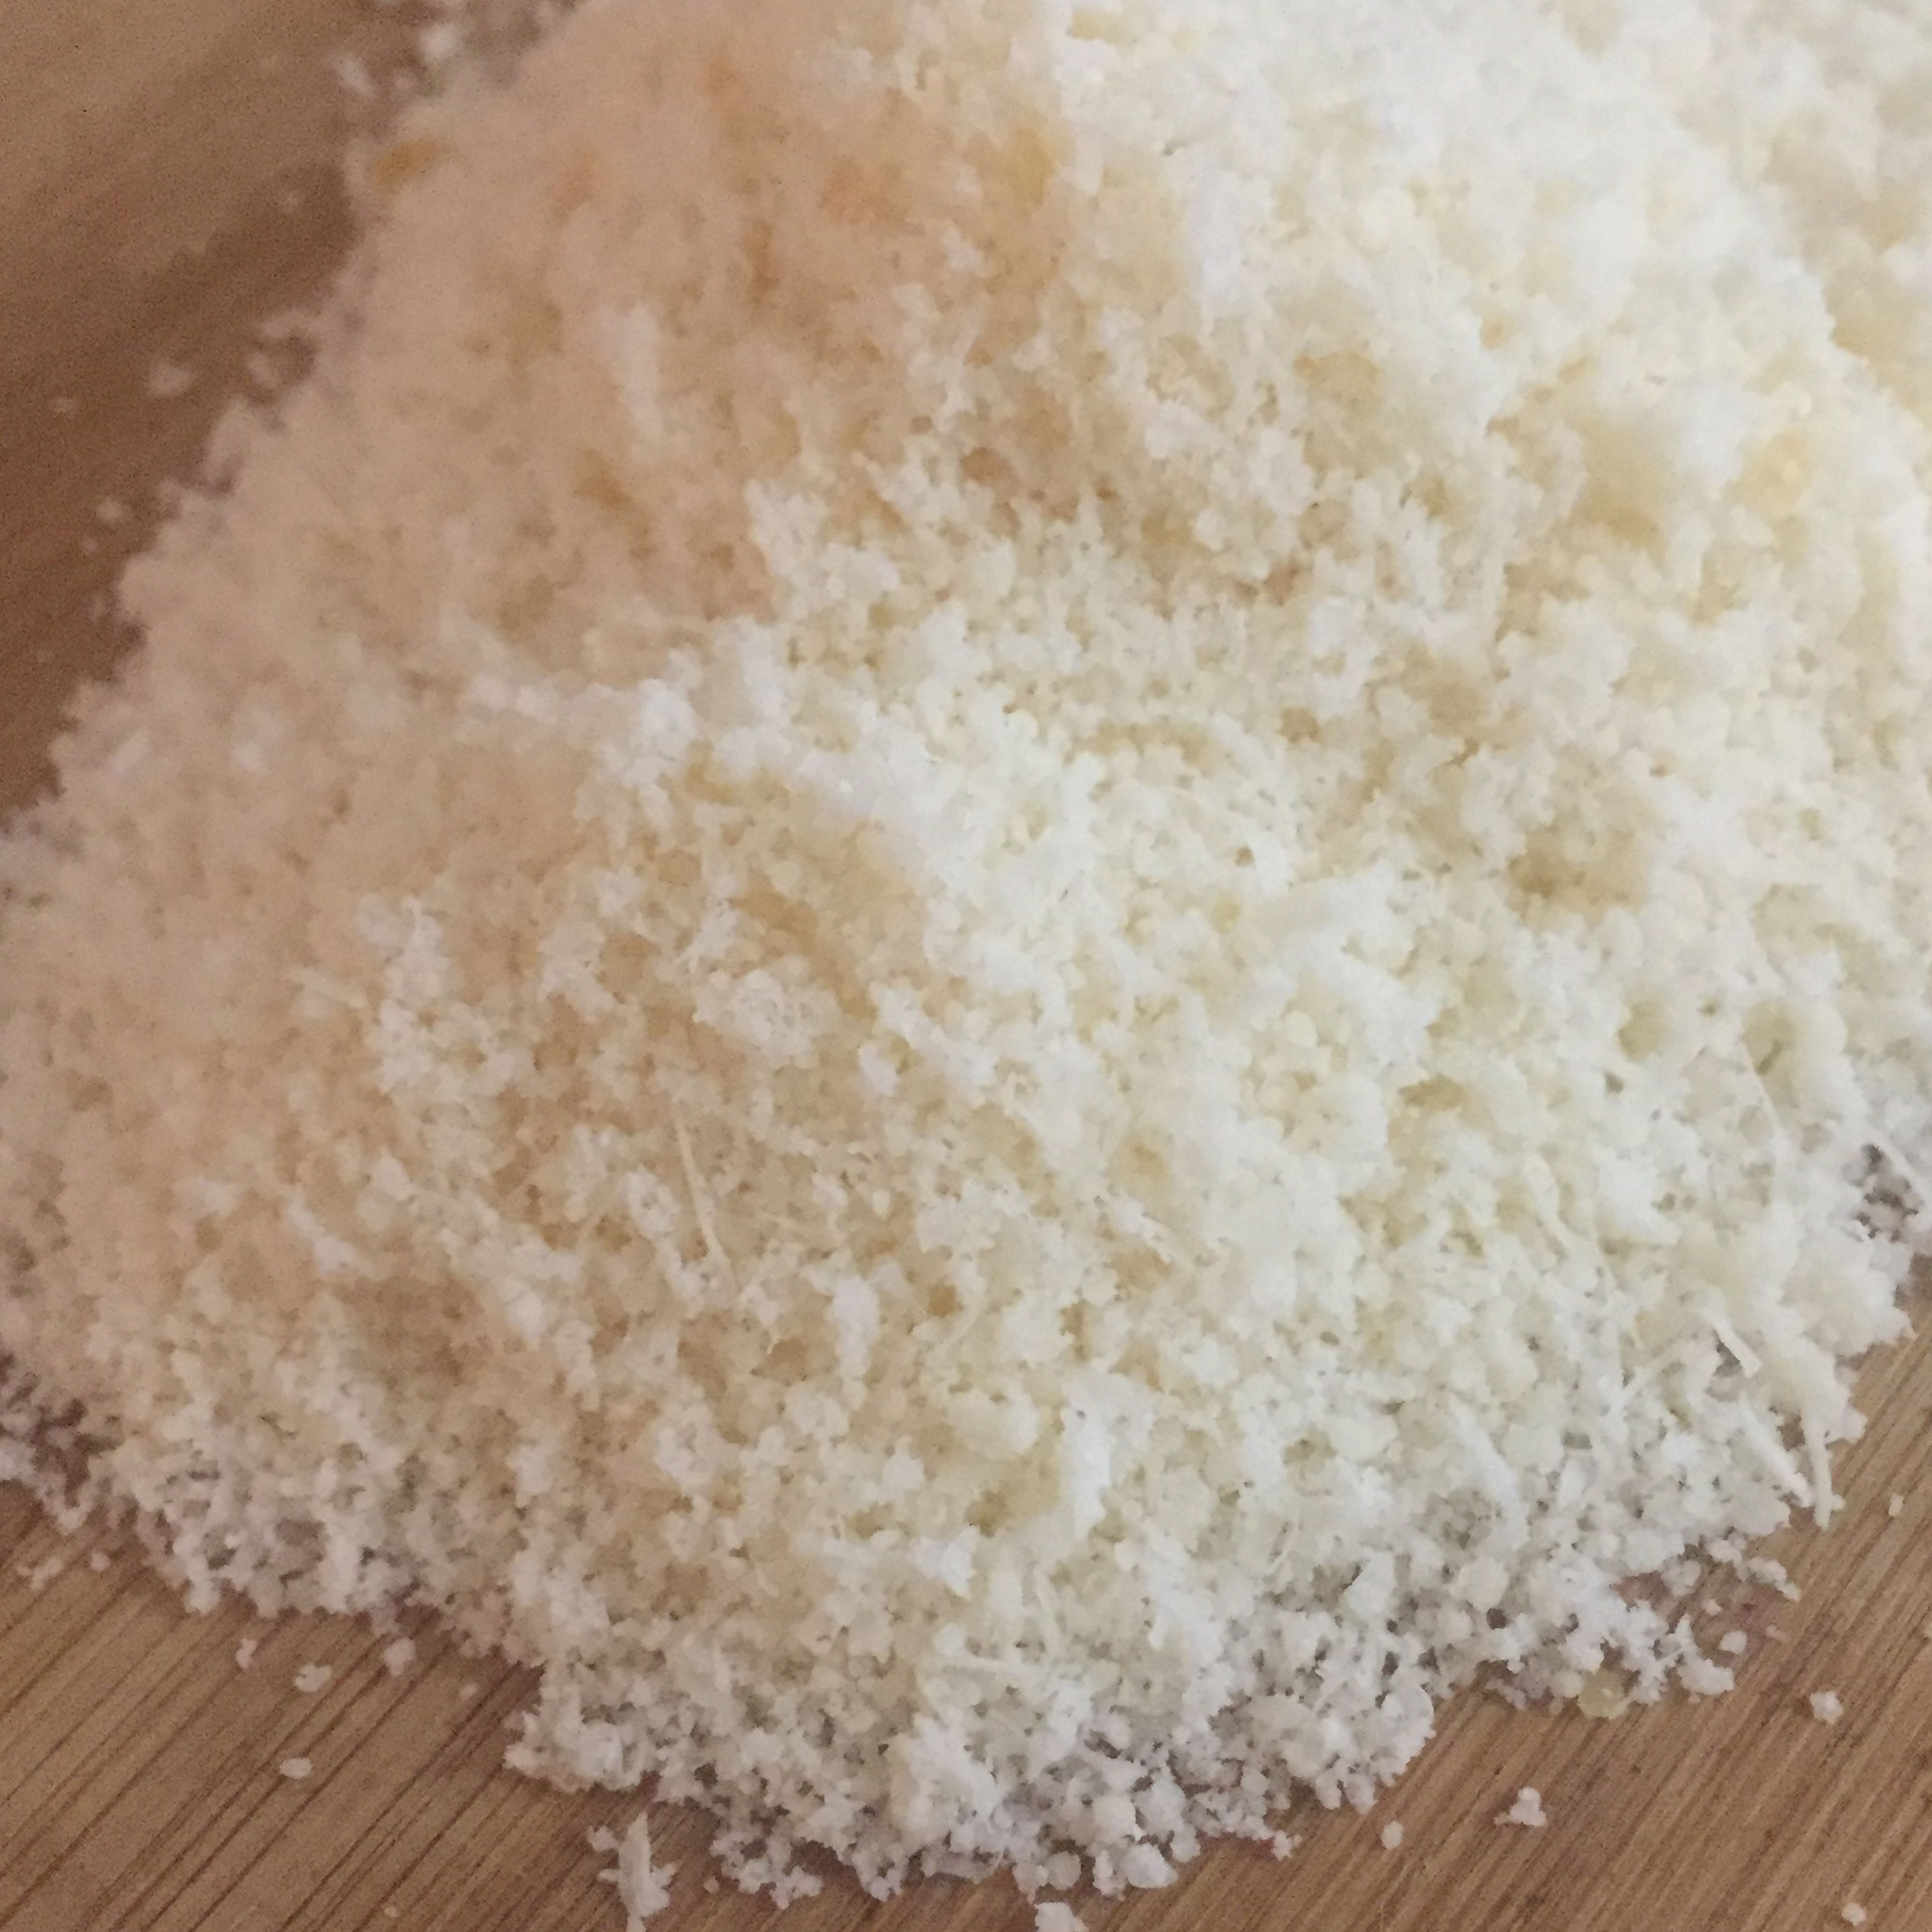 Finely grate the parmesan and pecorino